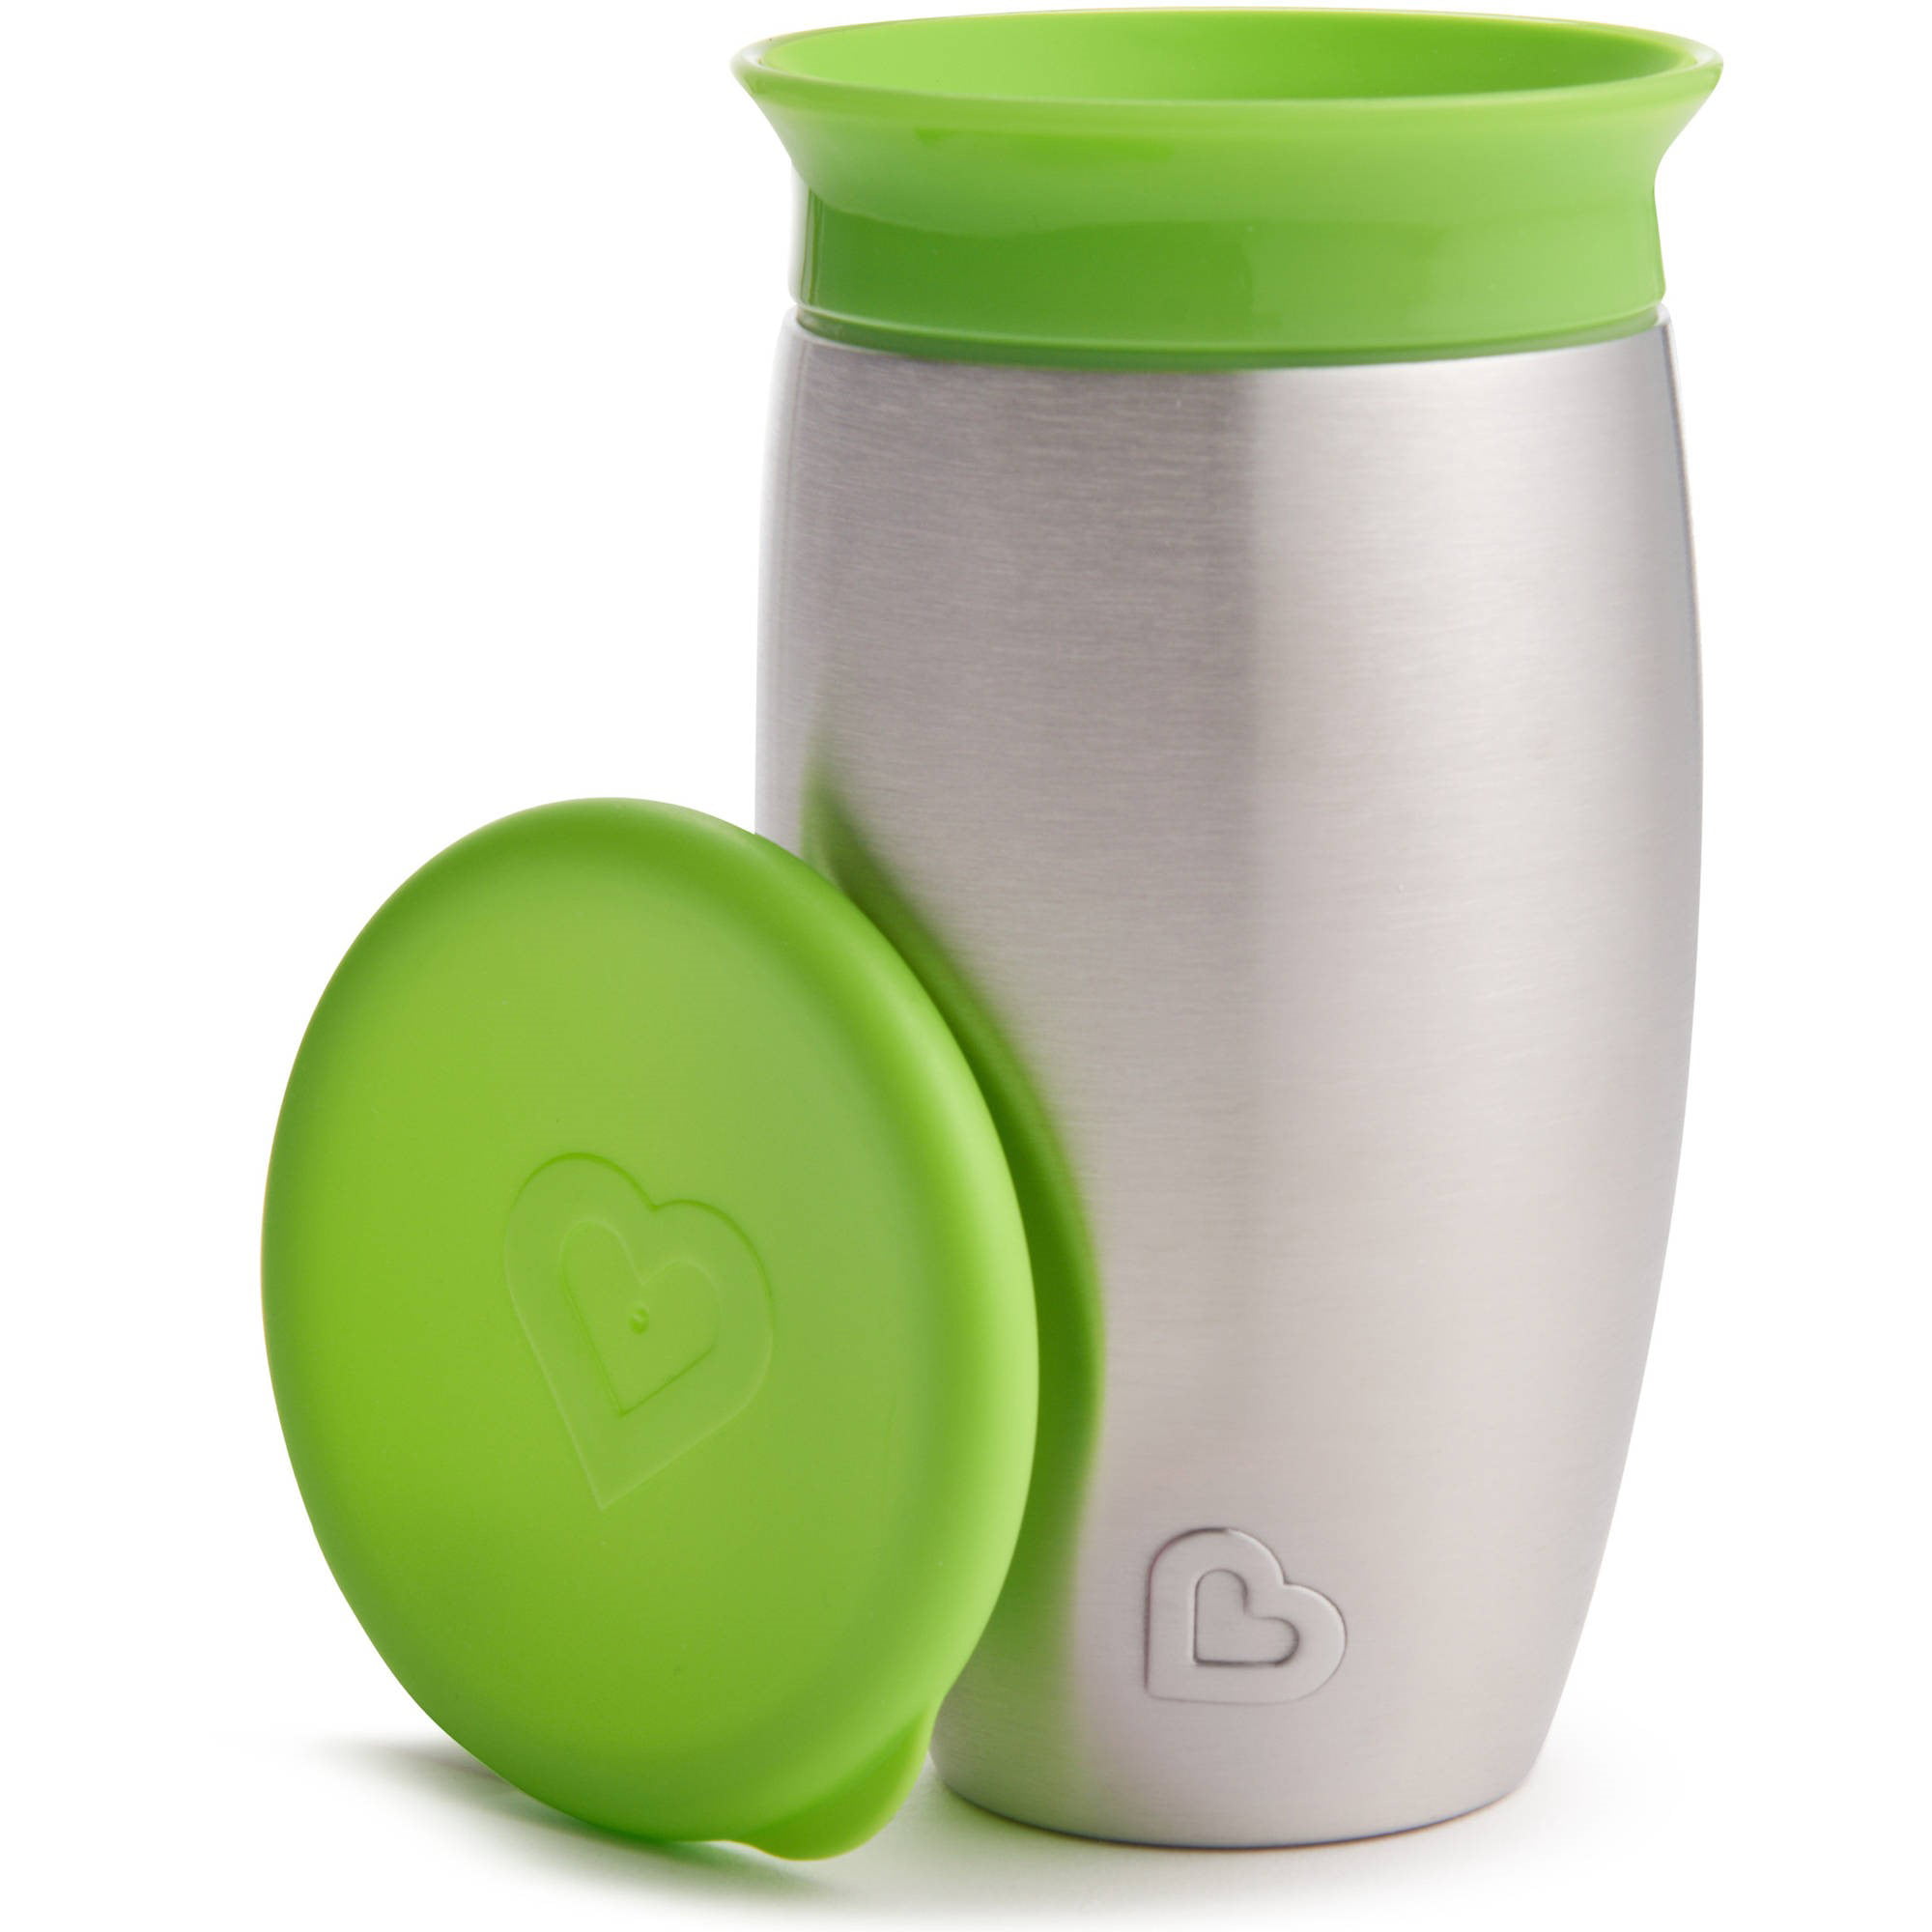 Munchkin Miracle 360 Spoutless Stainless Steel Sippy Cup, 10oz, Green Munchkin Sippy Cup Stainless Steel